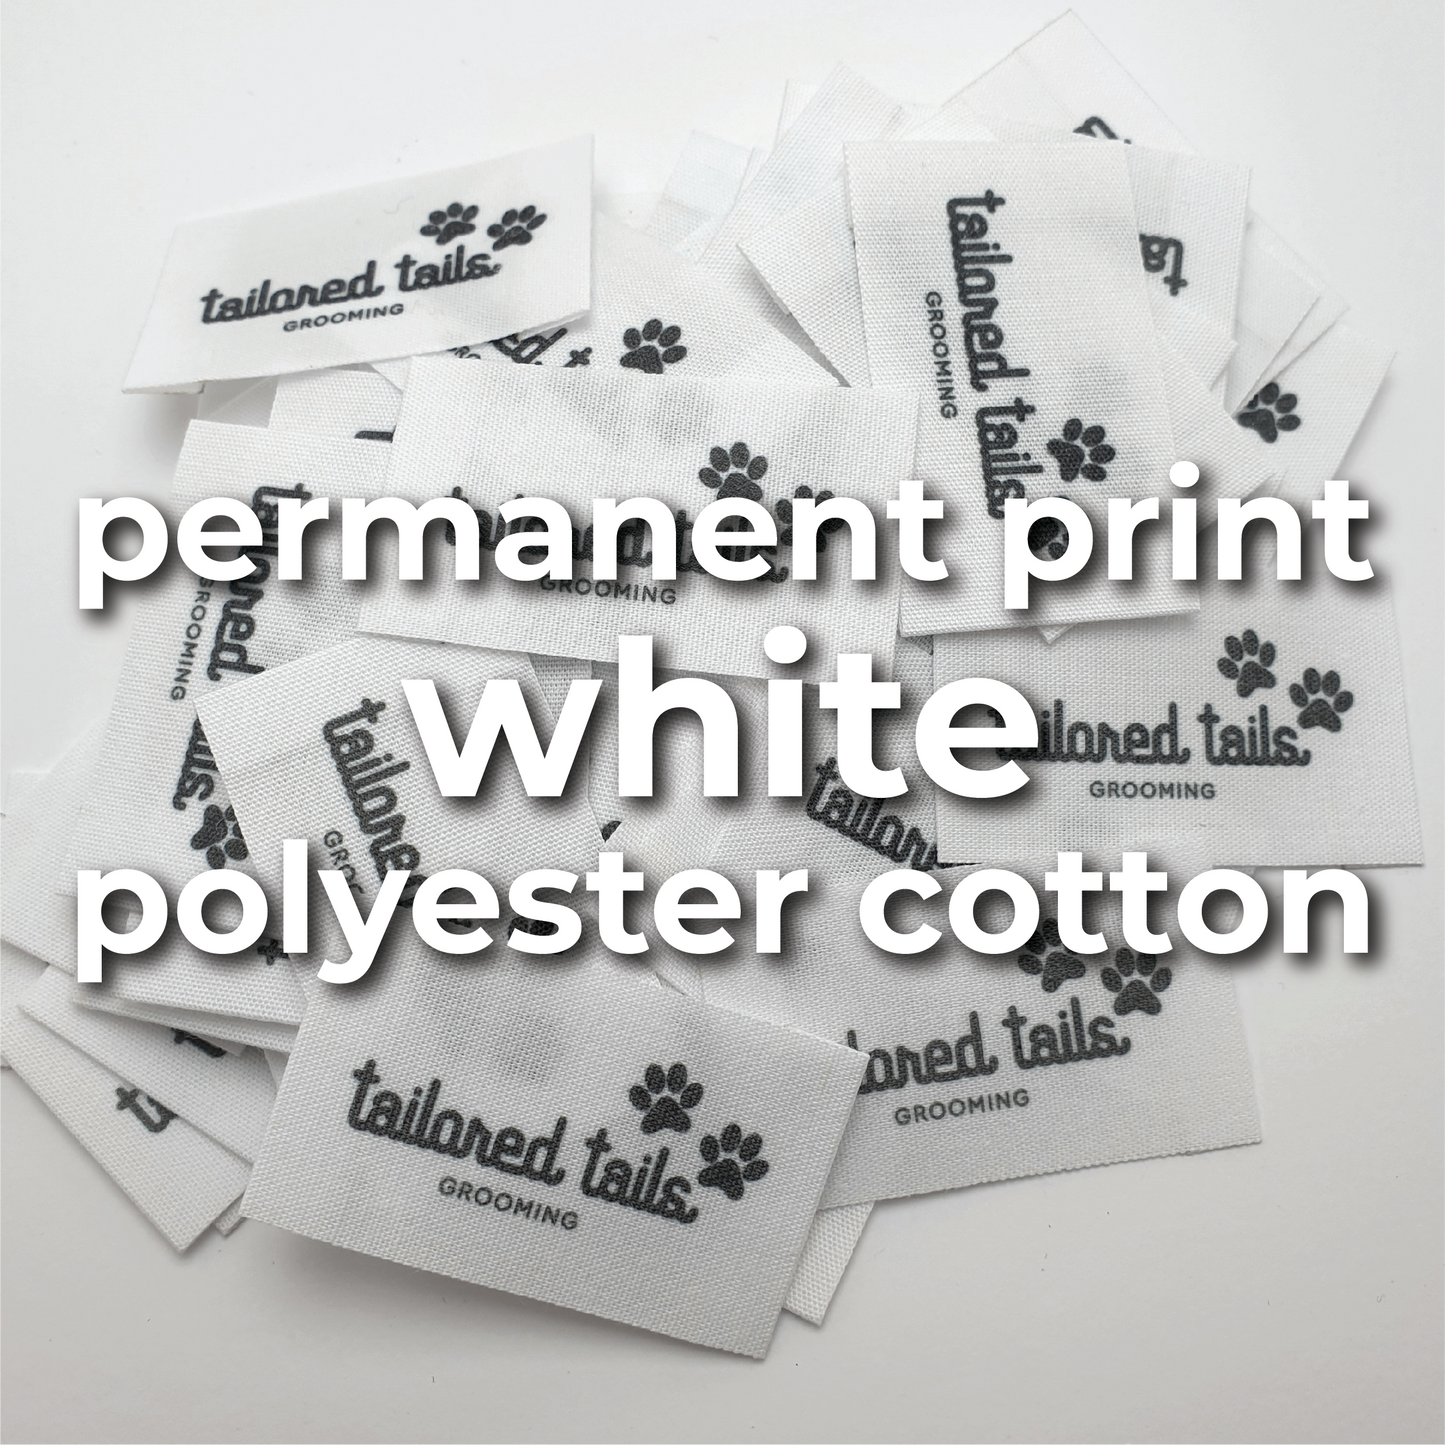 #00WPC - REORDER PERMANENT PRINTED WHITE POLYESTER COTTON LABELS